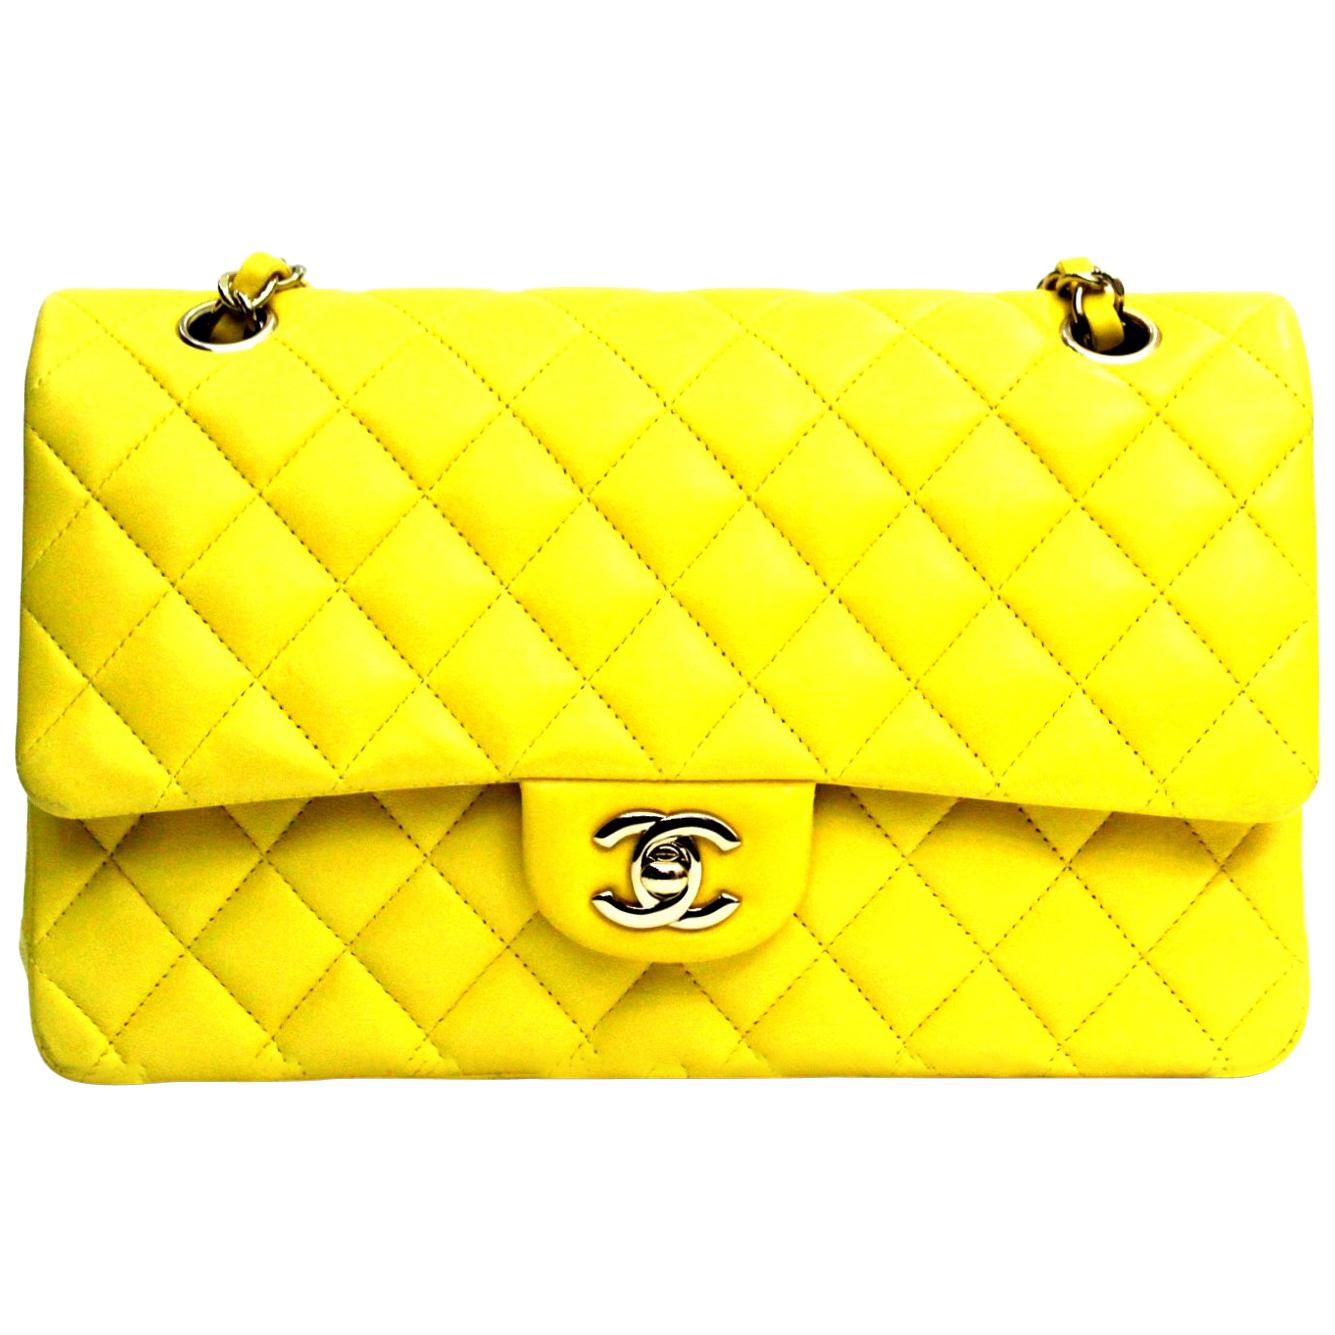 Chanel 19 small yellow BNIB Luxury Bags  Wallets on Carousell